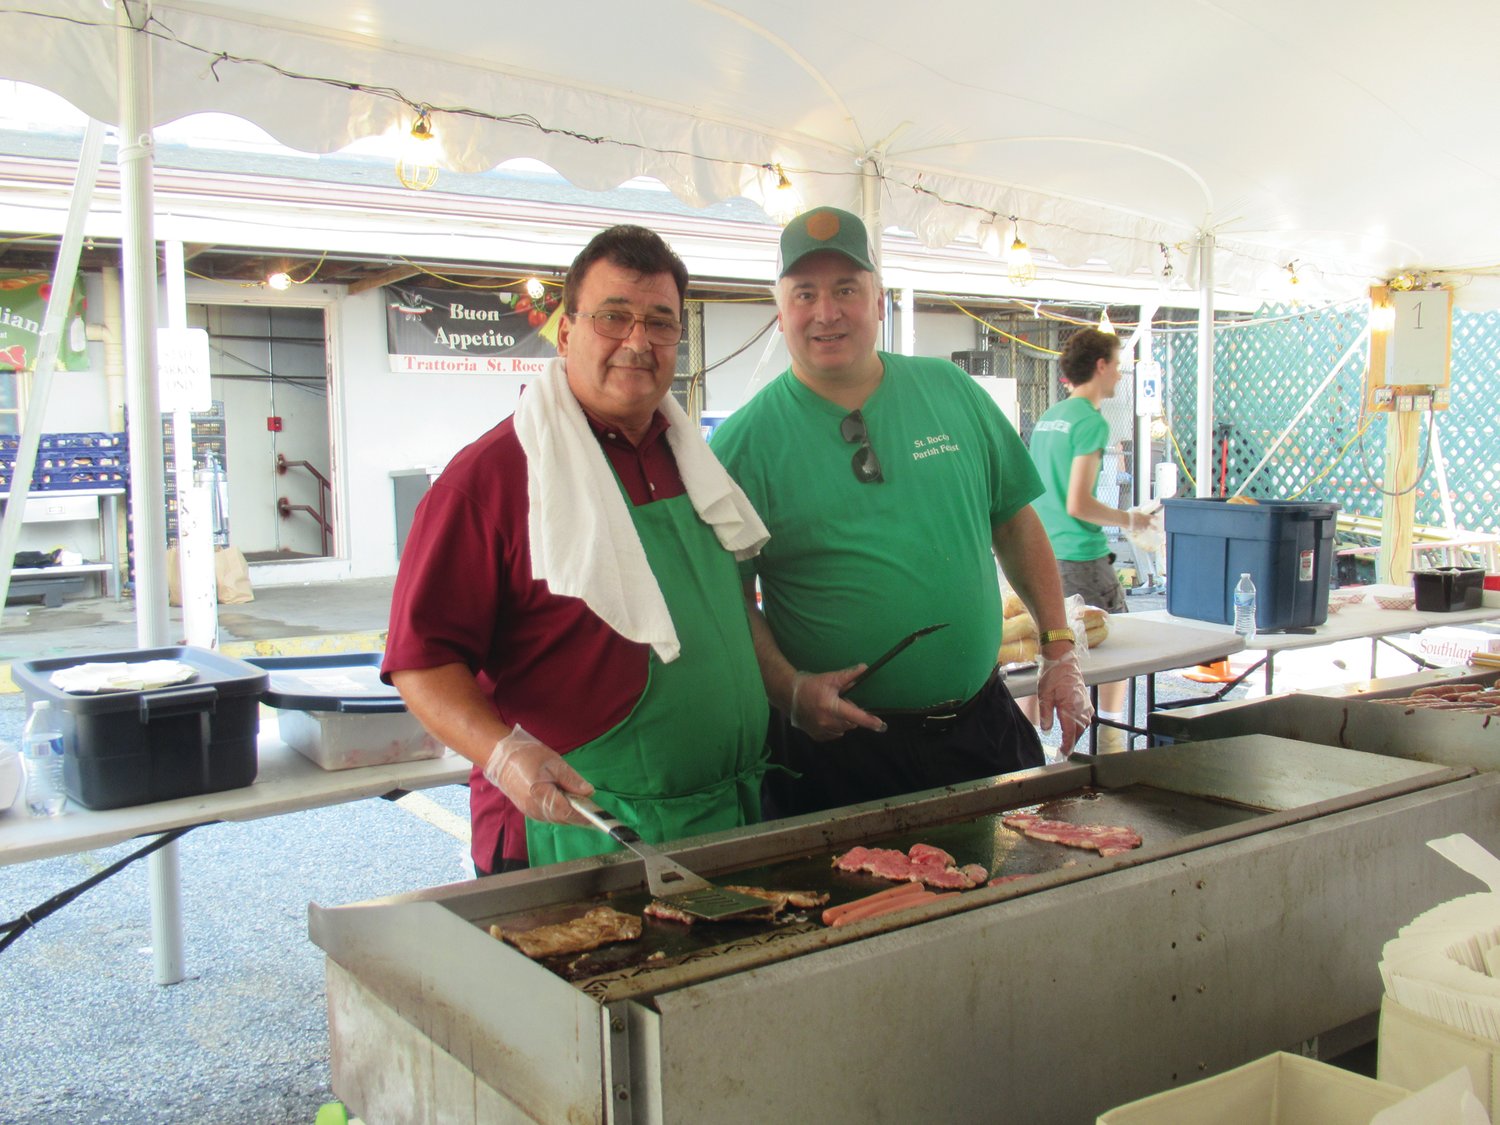 GRILL GUYS: Alex Palioottya (left) and Frank DiBiase were among those Holy Name Society members who cooked everything from steak sandwiches to sausage and peppers during the feast and festival.